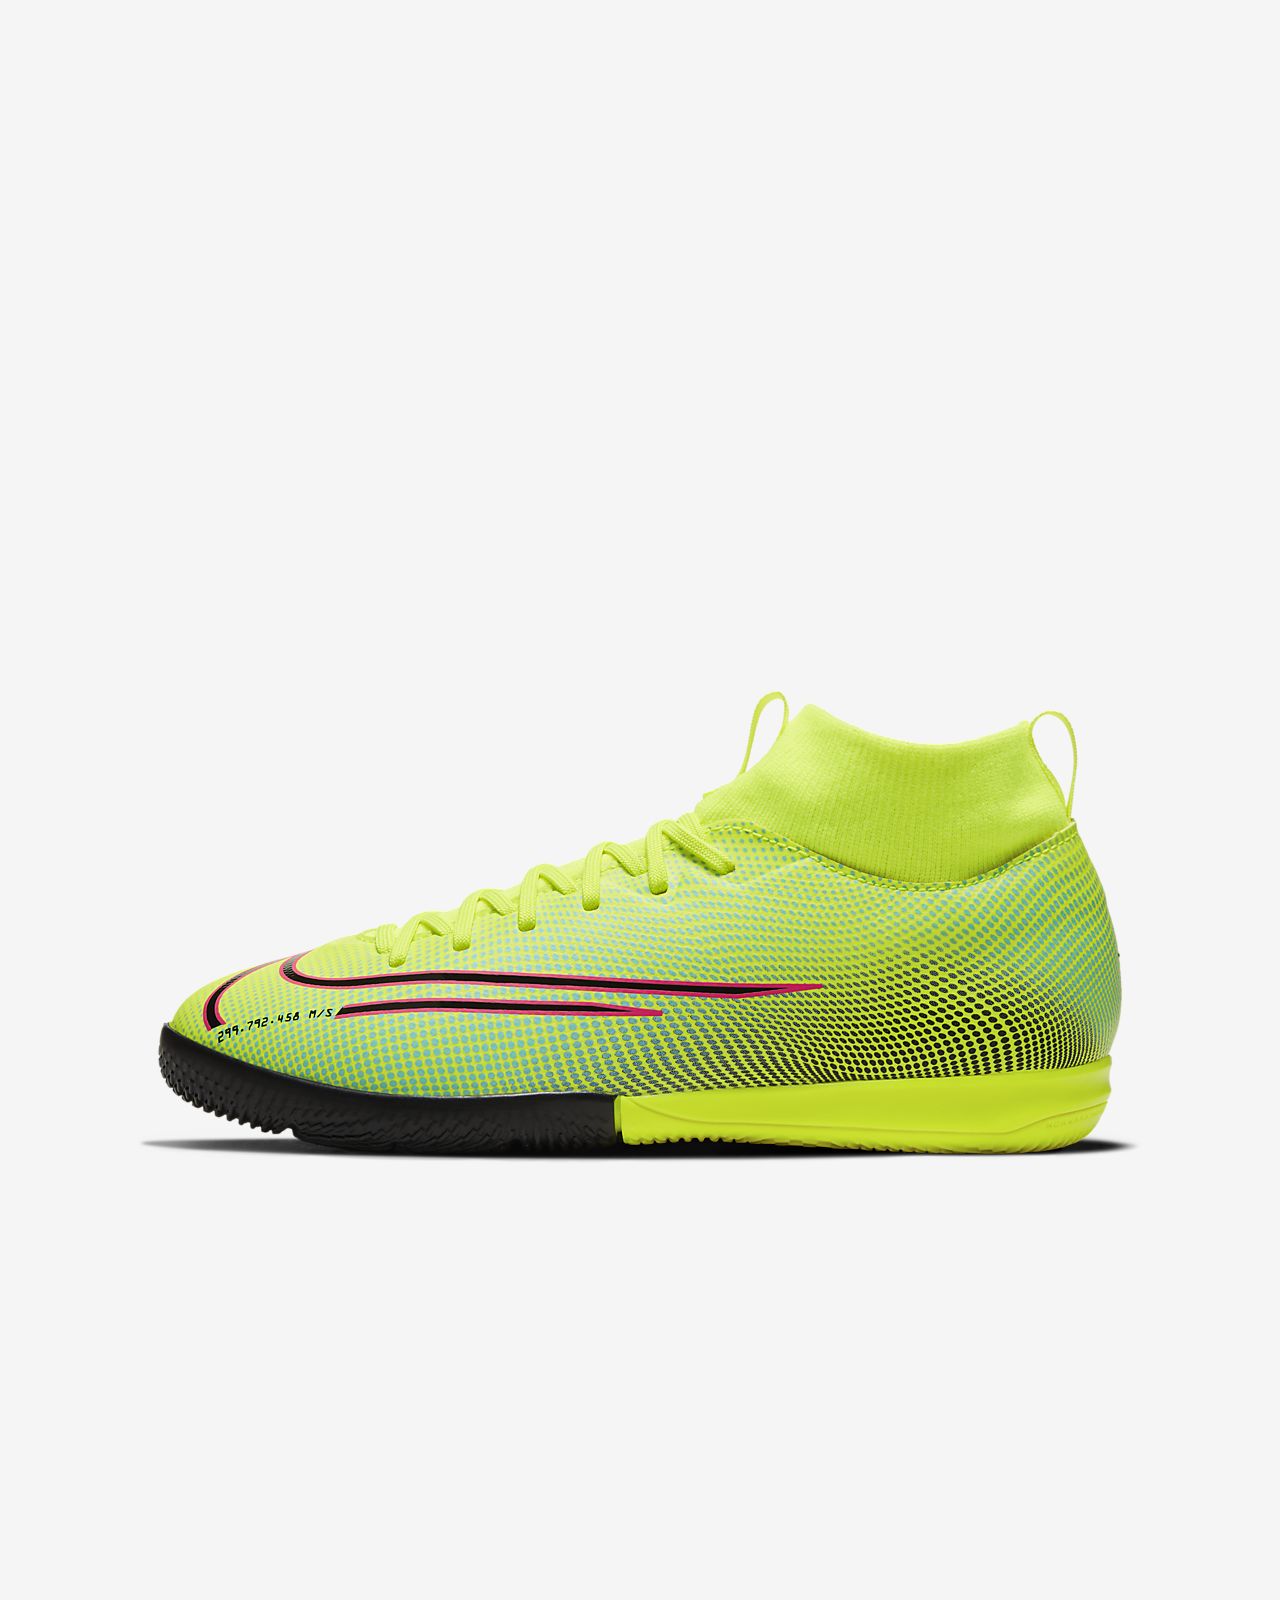 Buy Nike JR Superfly 7 Academy MDS IC Yellow Green 5 at.